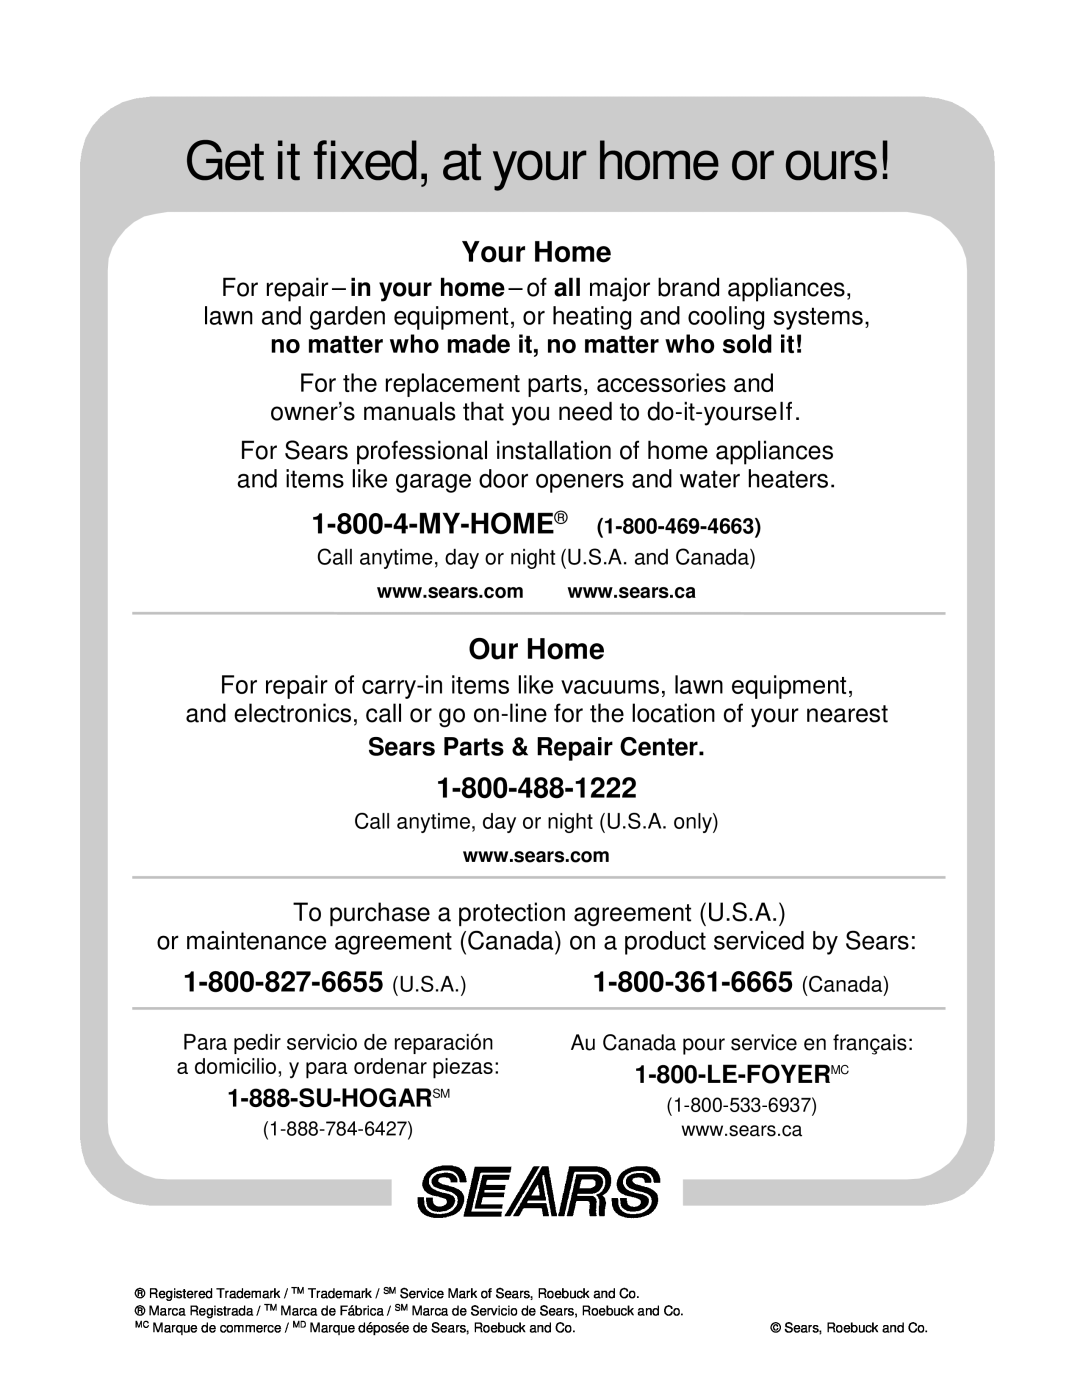 Sears 247.77055 Sears Parts & Repair Center, Su-Hogarsm, Le-Foyermc, Get it fixed, at your home or ours, Your Home 